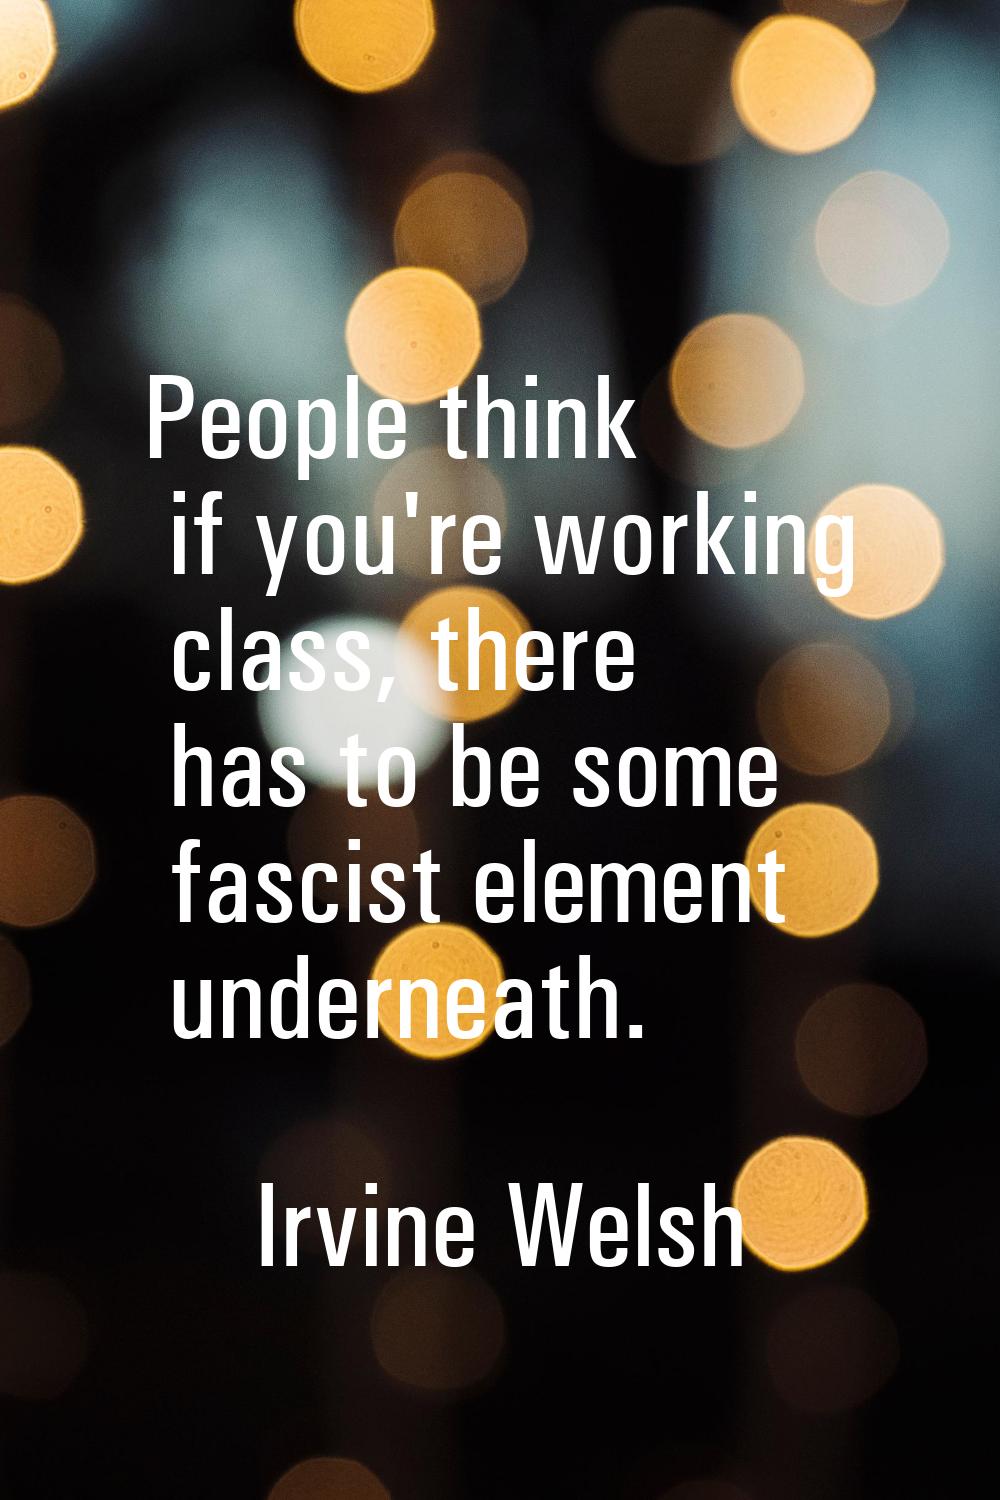 People think if you're working class, there has to be some fascist element underneath.